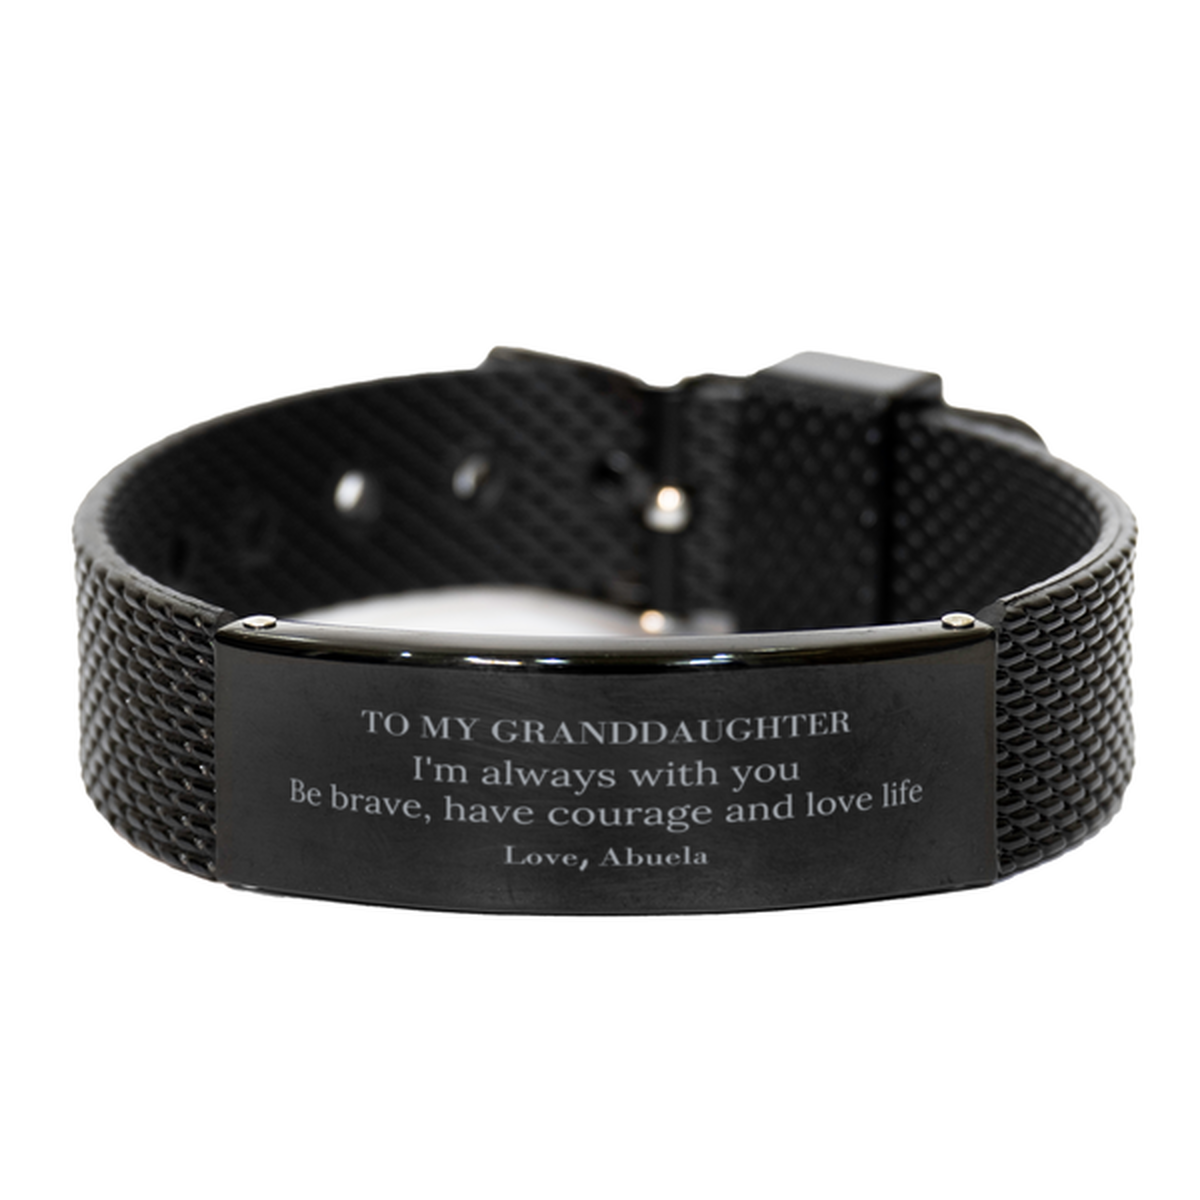 To My Granddaughter Gifts from Abuela, Unique Black Shark Mesh Bracelet Inspirational Christmas Birthday Graduation Gifts for Granddaughter I'm always with you. Be brave, have courage and love life. Love, Abuela